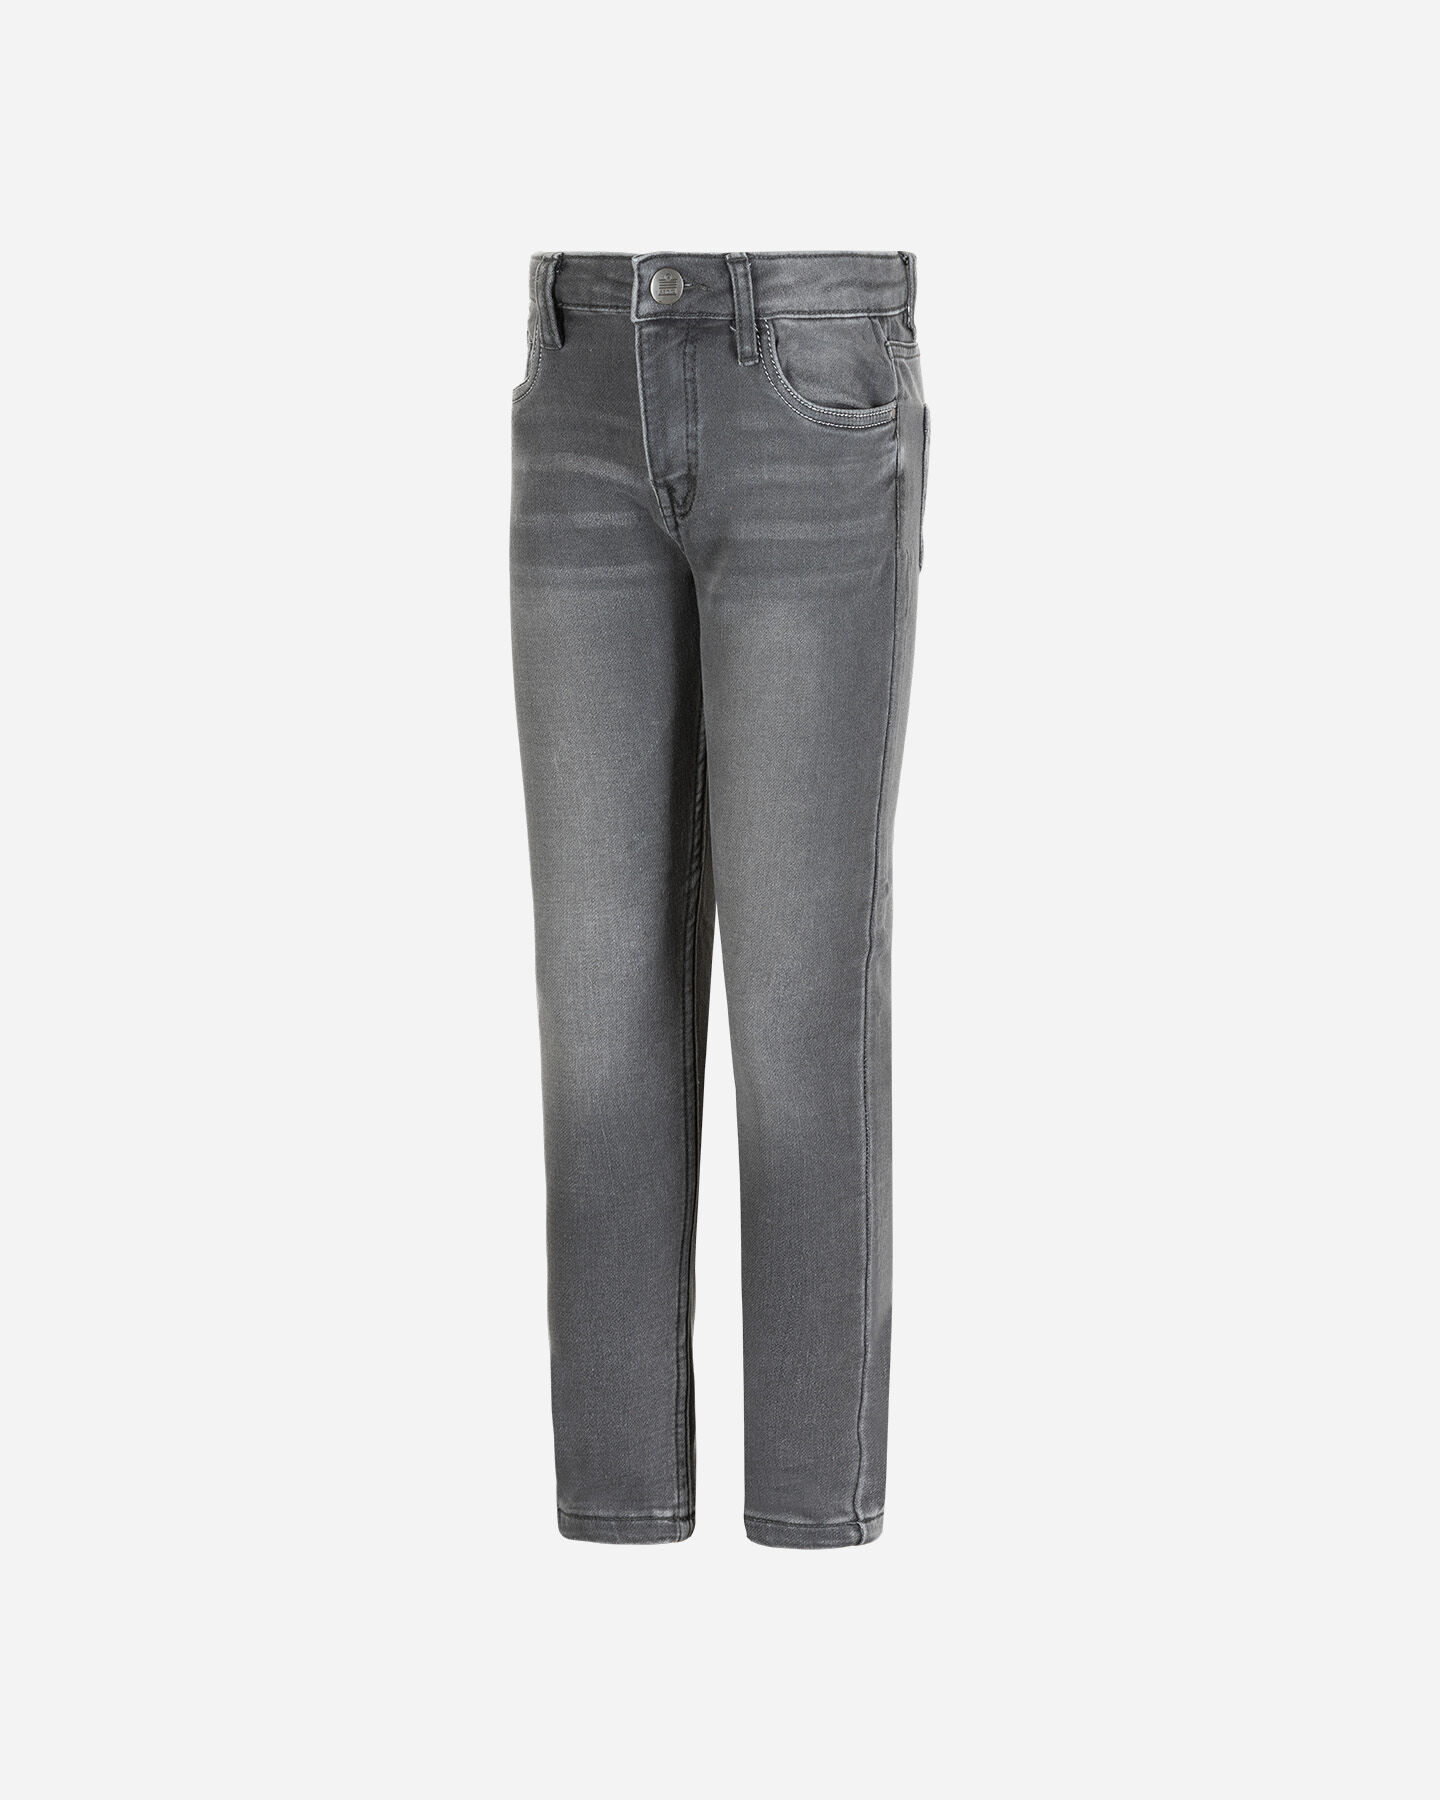  Jeans ADMIRAL DENIM JR S4081319|MD|4A scatto 0